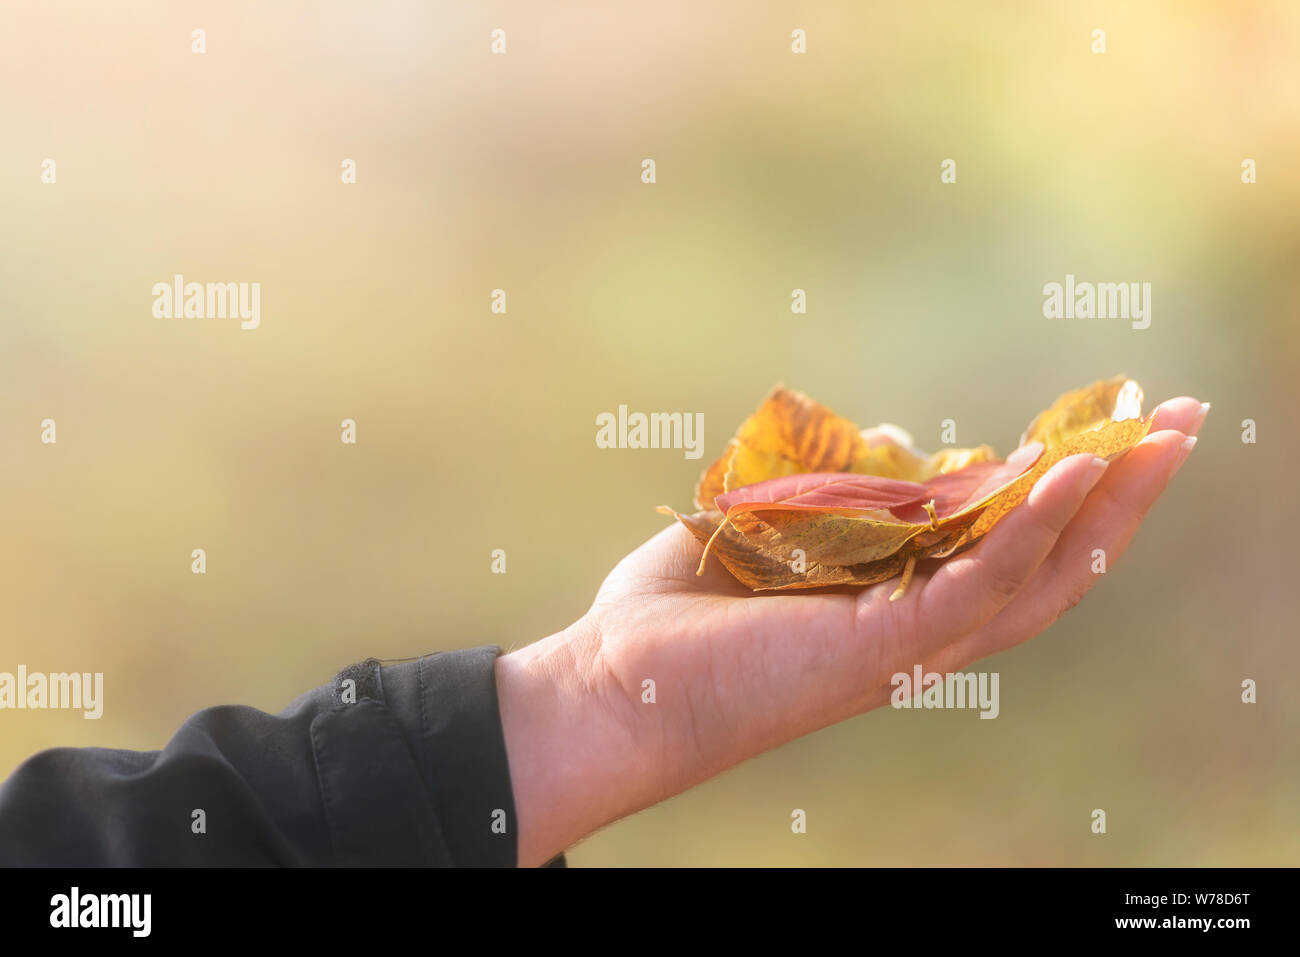 Colorful golden autumn frame with yellow fallen leaves held in hand under sunlight. Fall concept with copy space. Stock Photo